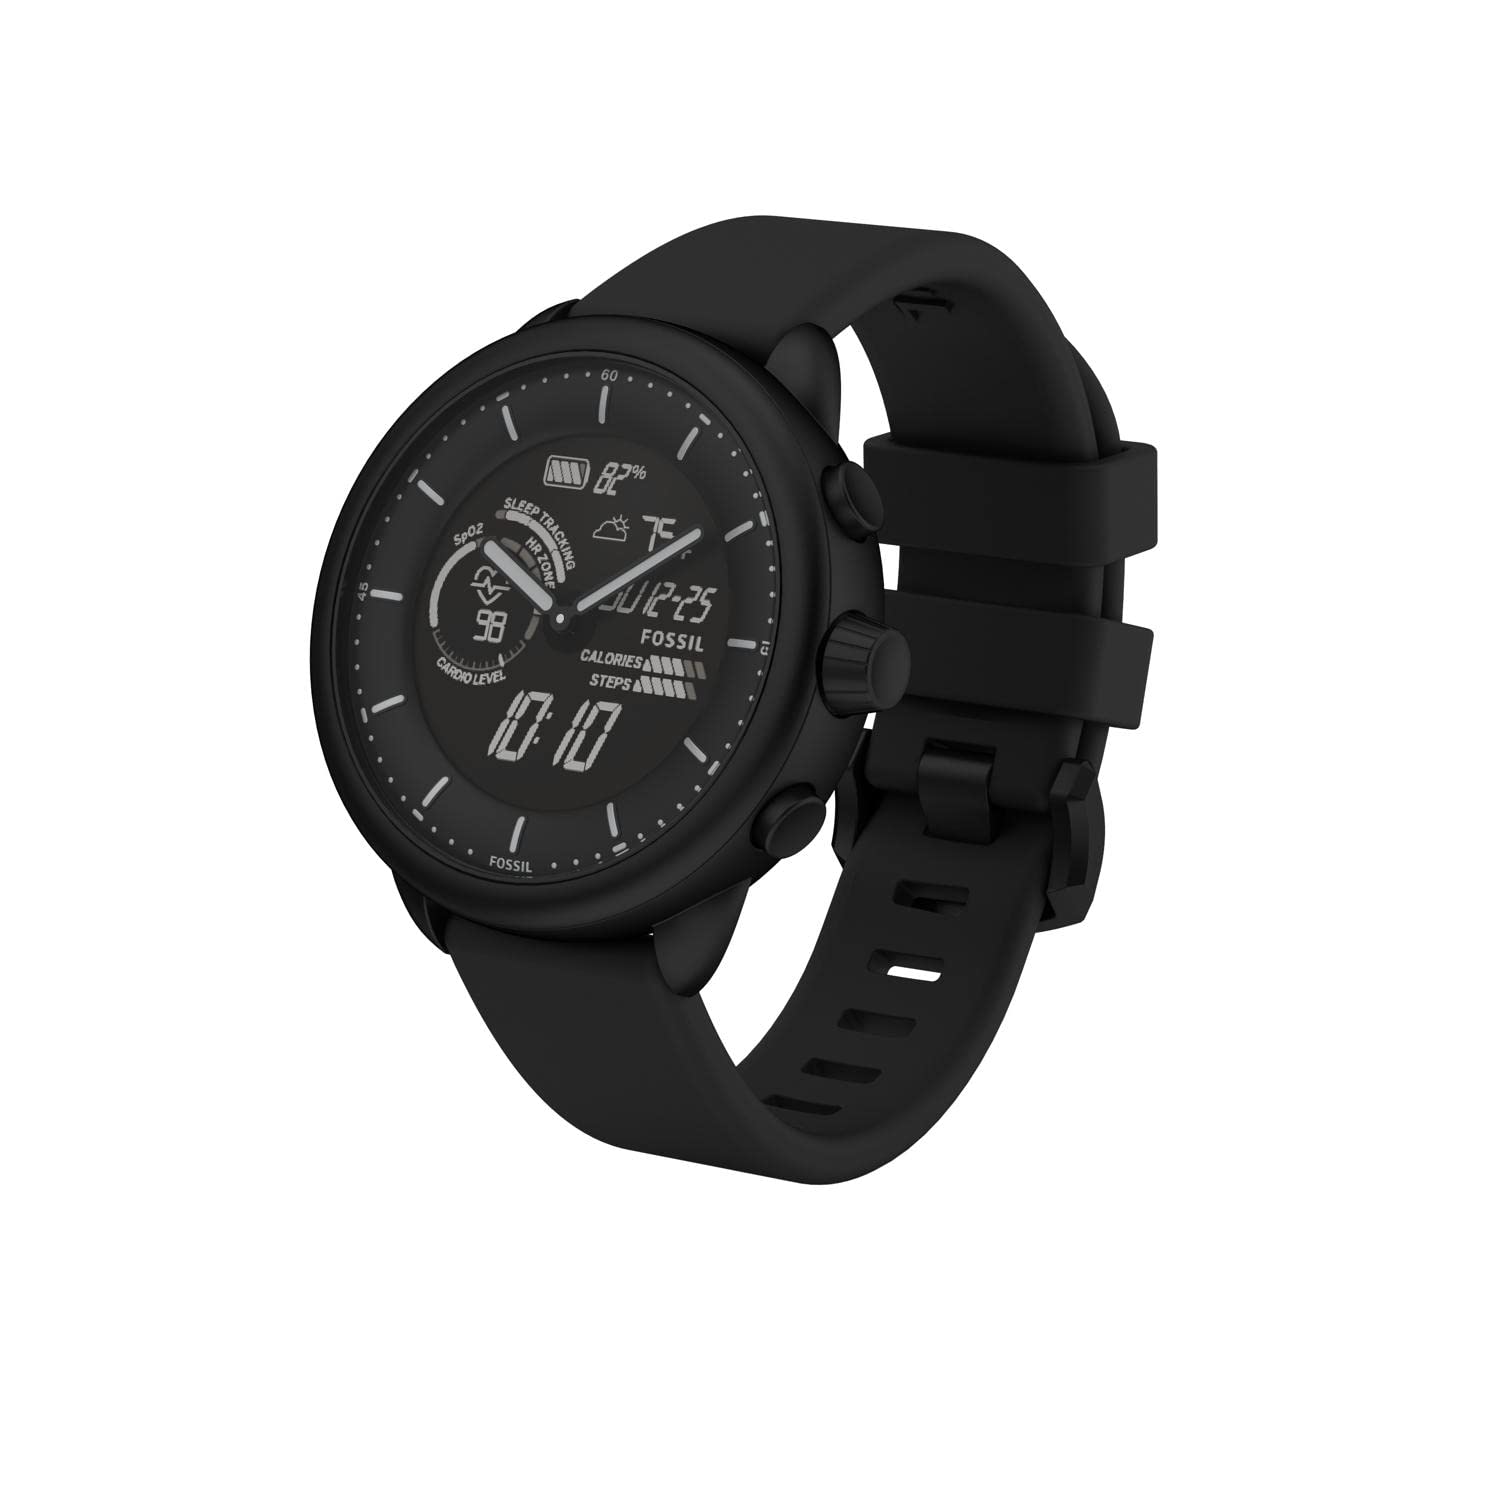 Fossil Gen 6 Wellness Edition Hybrid Smart Watch with Alexa Built-In, Fitness Tracker, Sleep Tracker, Heart Rate Monitor, Music Control, Smartphone Notifications